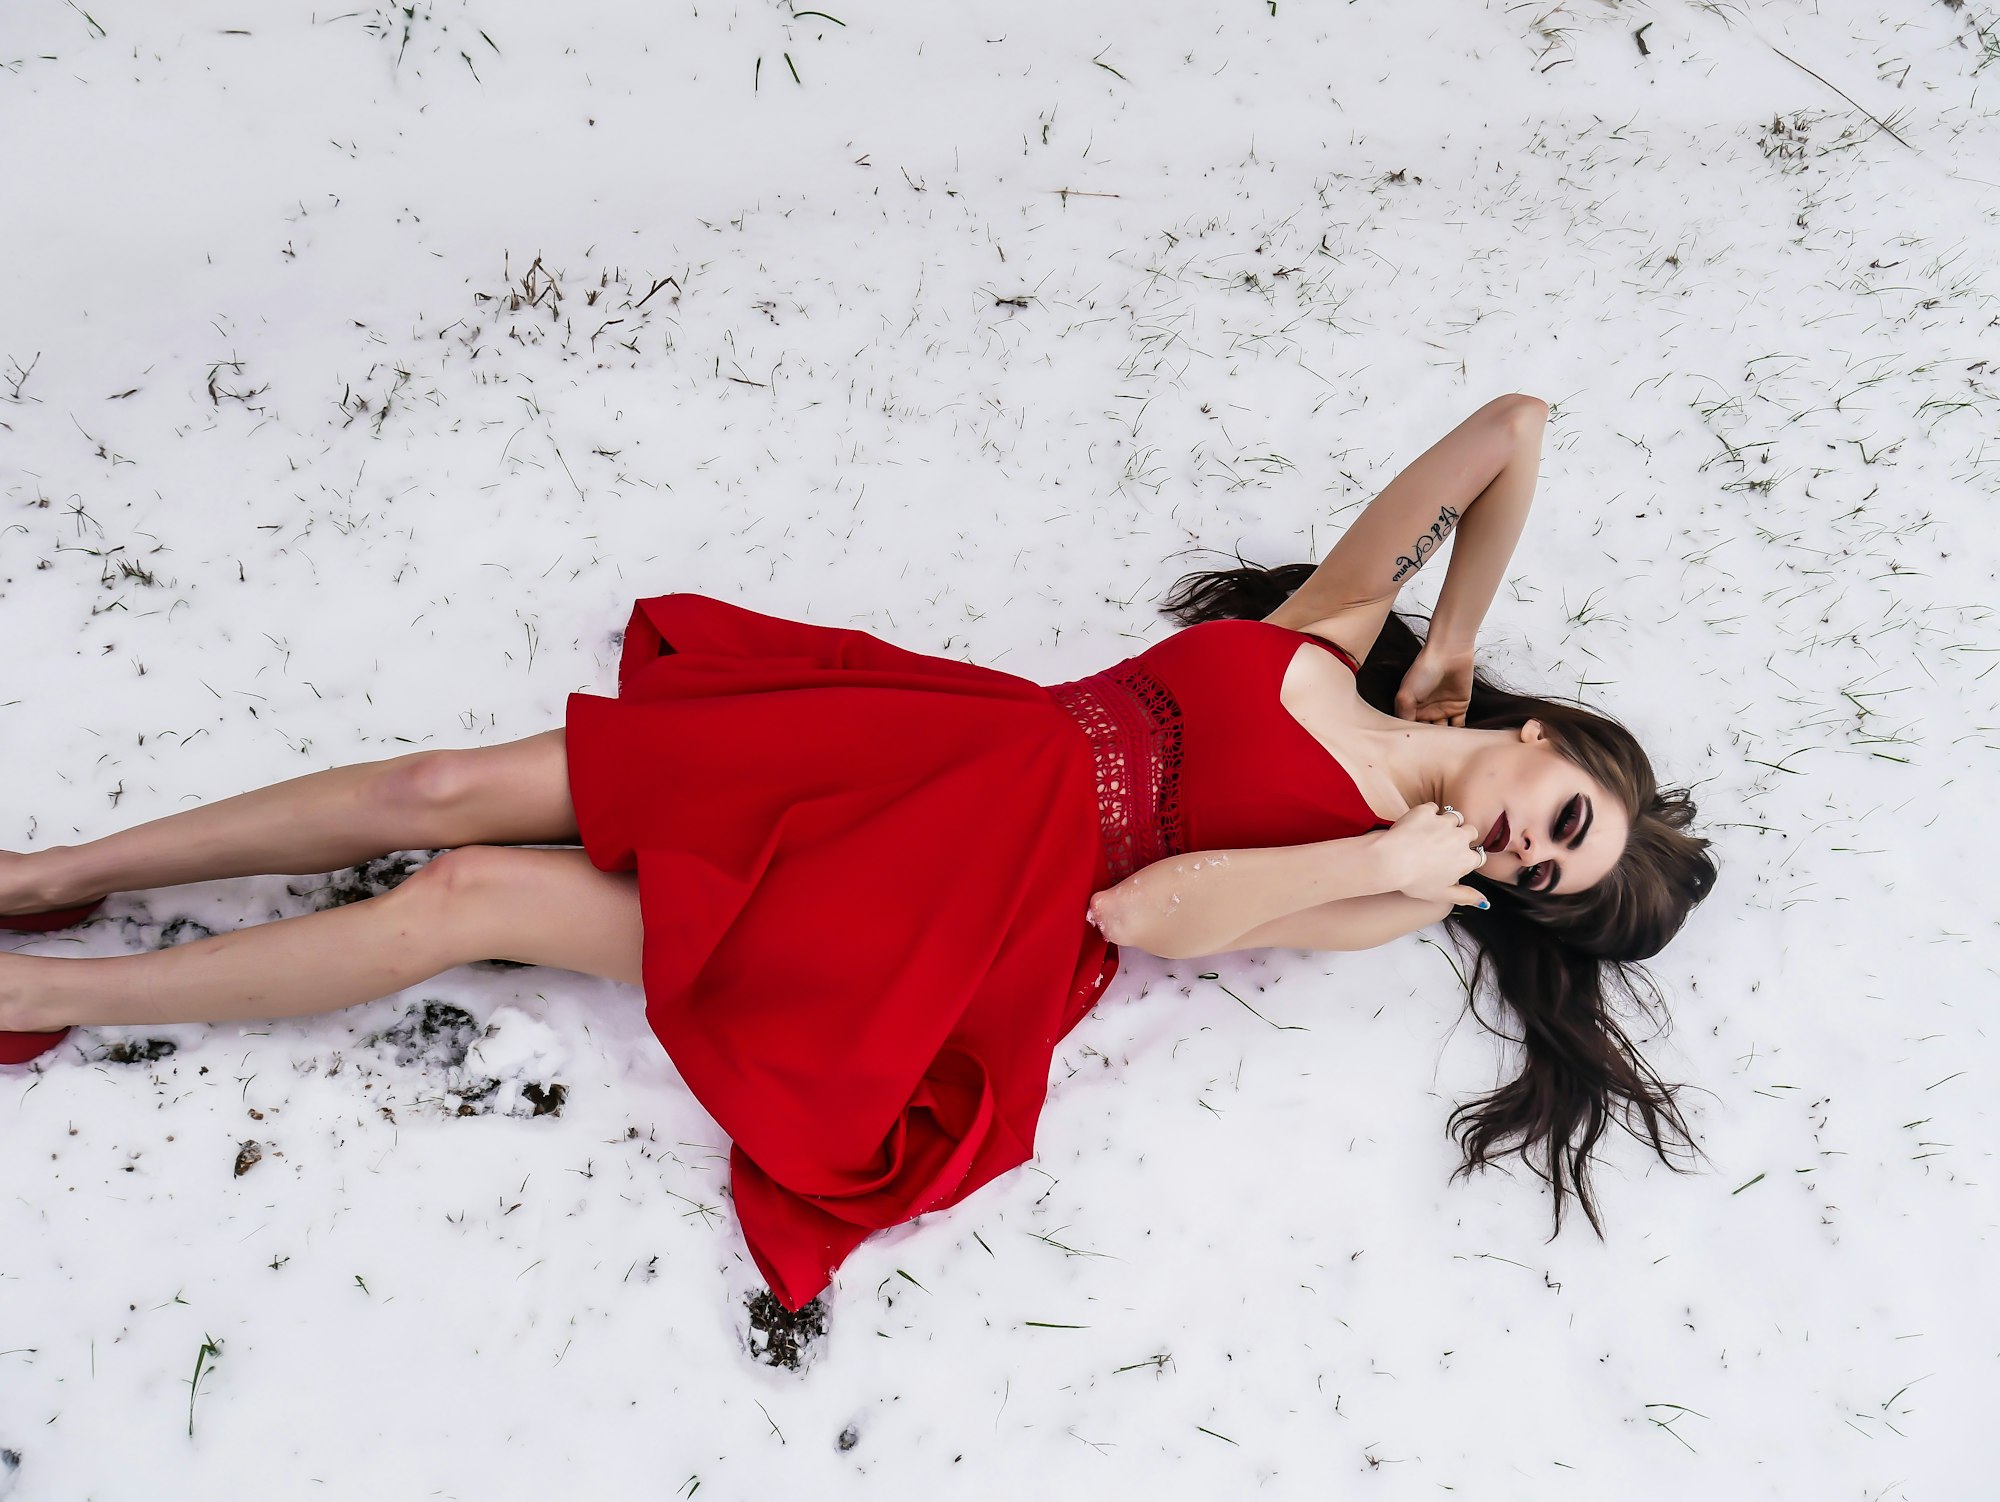 Here in East Texas, snow is rare. January of 2018 saw the most snowfall in 7 years, so I knew I needed to get some photos, but my wife and I decided to take it a step further with a touch of hypothermia. I took dozens of shots until she bravely suggested a couple sitting and even laying in the snow, clad only in her pretty red summer dress. The contrast of the vivid red directly against the white snow had me instantly captivated and I took as many as possible during the few seconds she was willing to withstand the cold. There were dozens that turned out beautifully, but this was a favorite!